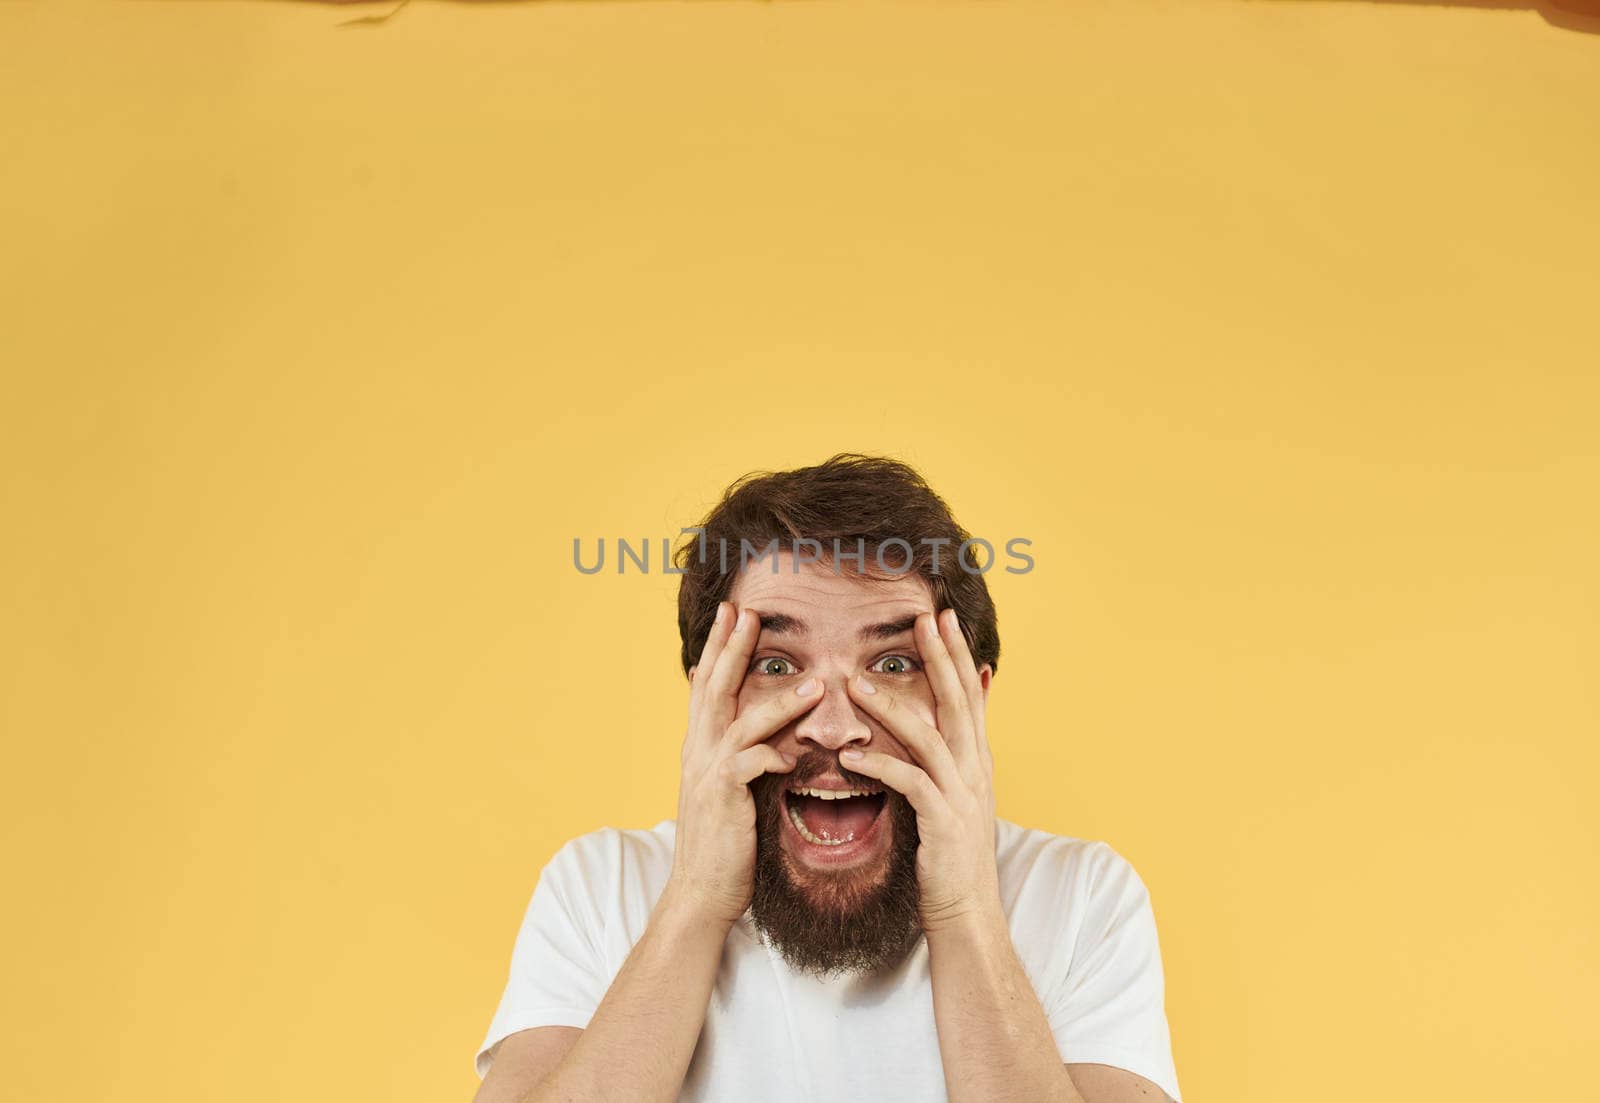 Upset man holds his hands near his face on a yellow background. High quality photo